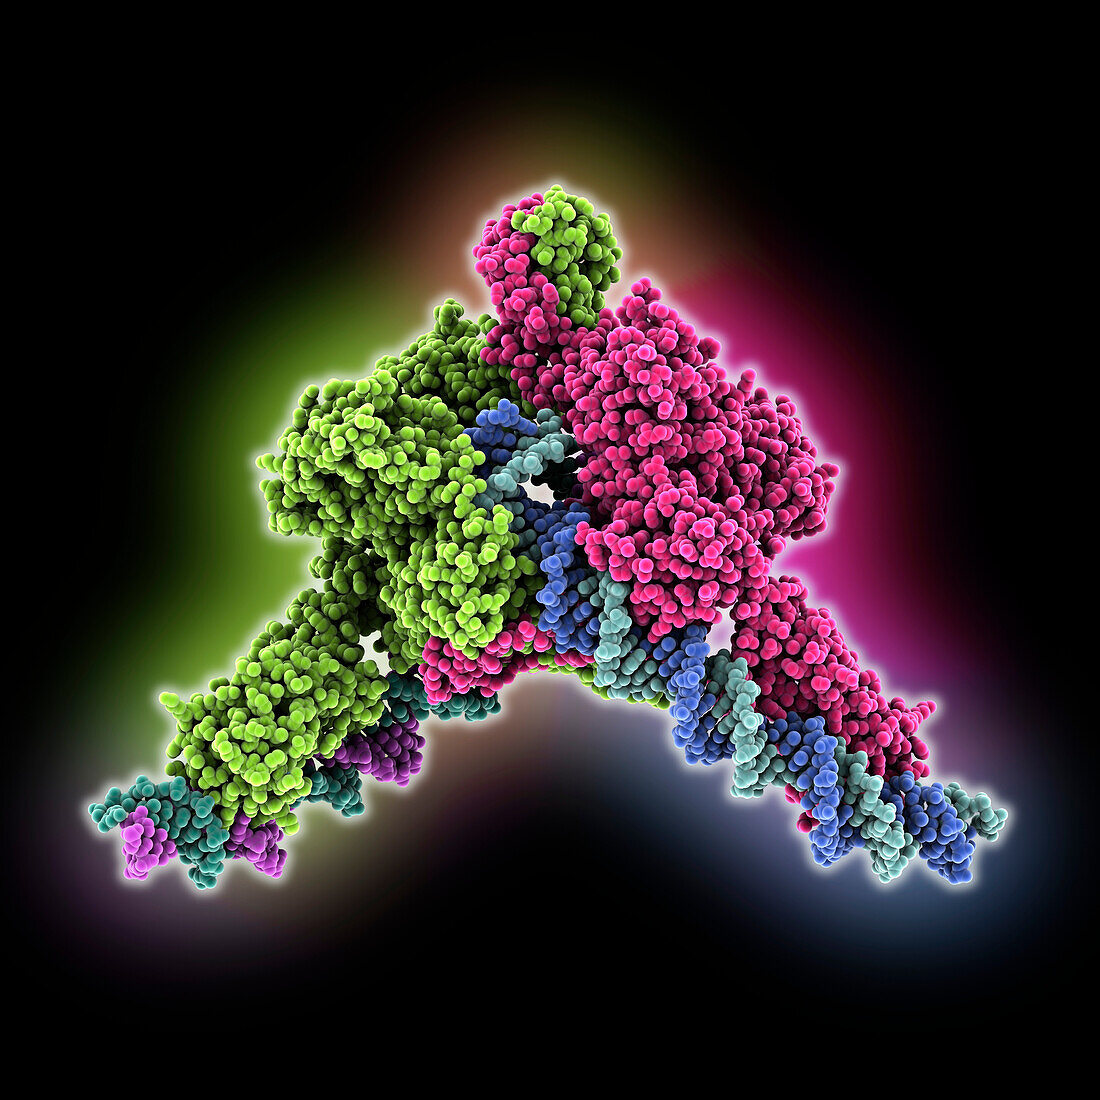 Transposase complexed with DNA, molecular model